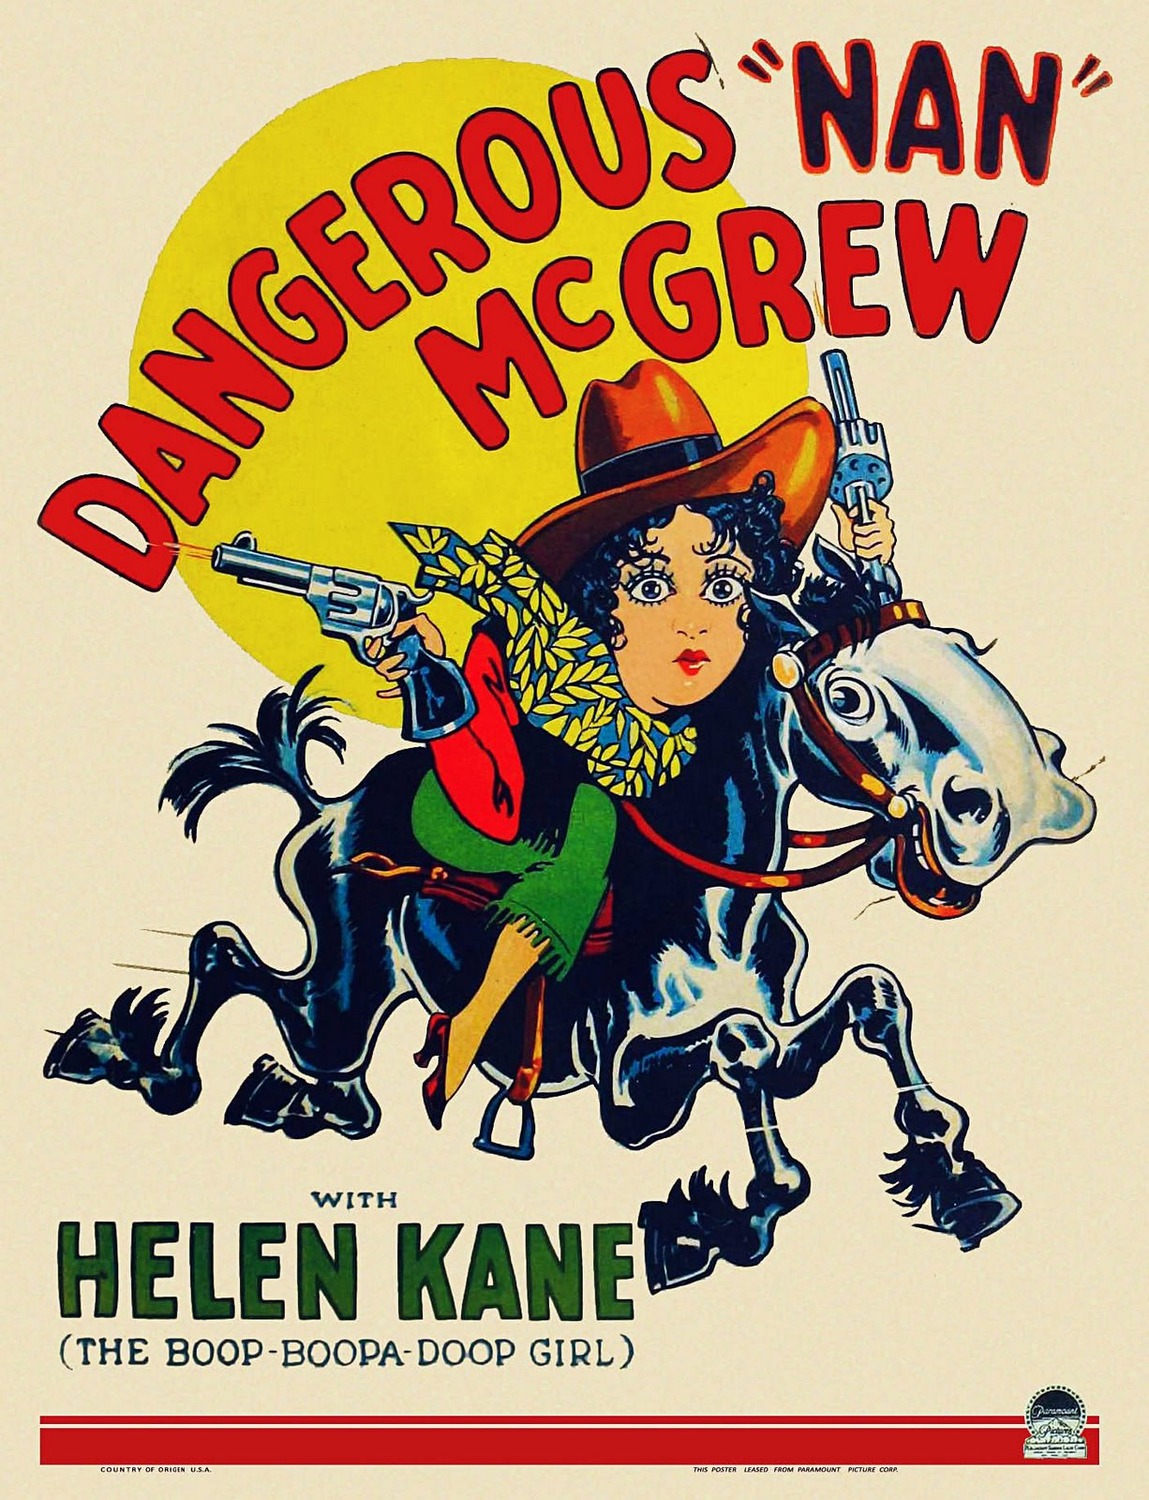 Extra Large Movie Poster Image for Dangerous Nan McGrew 